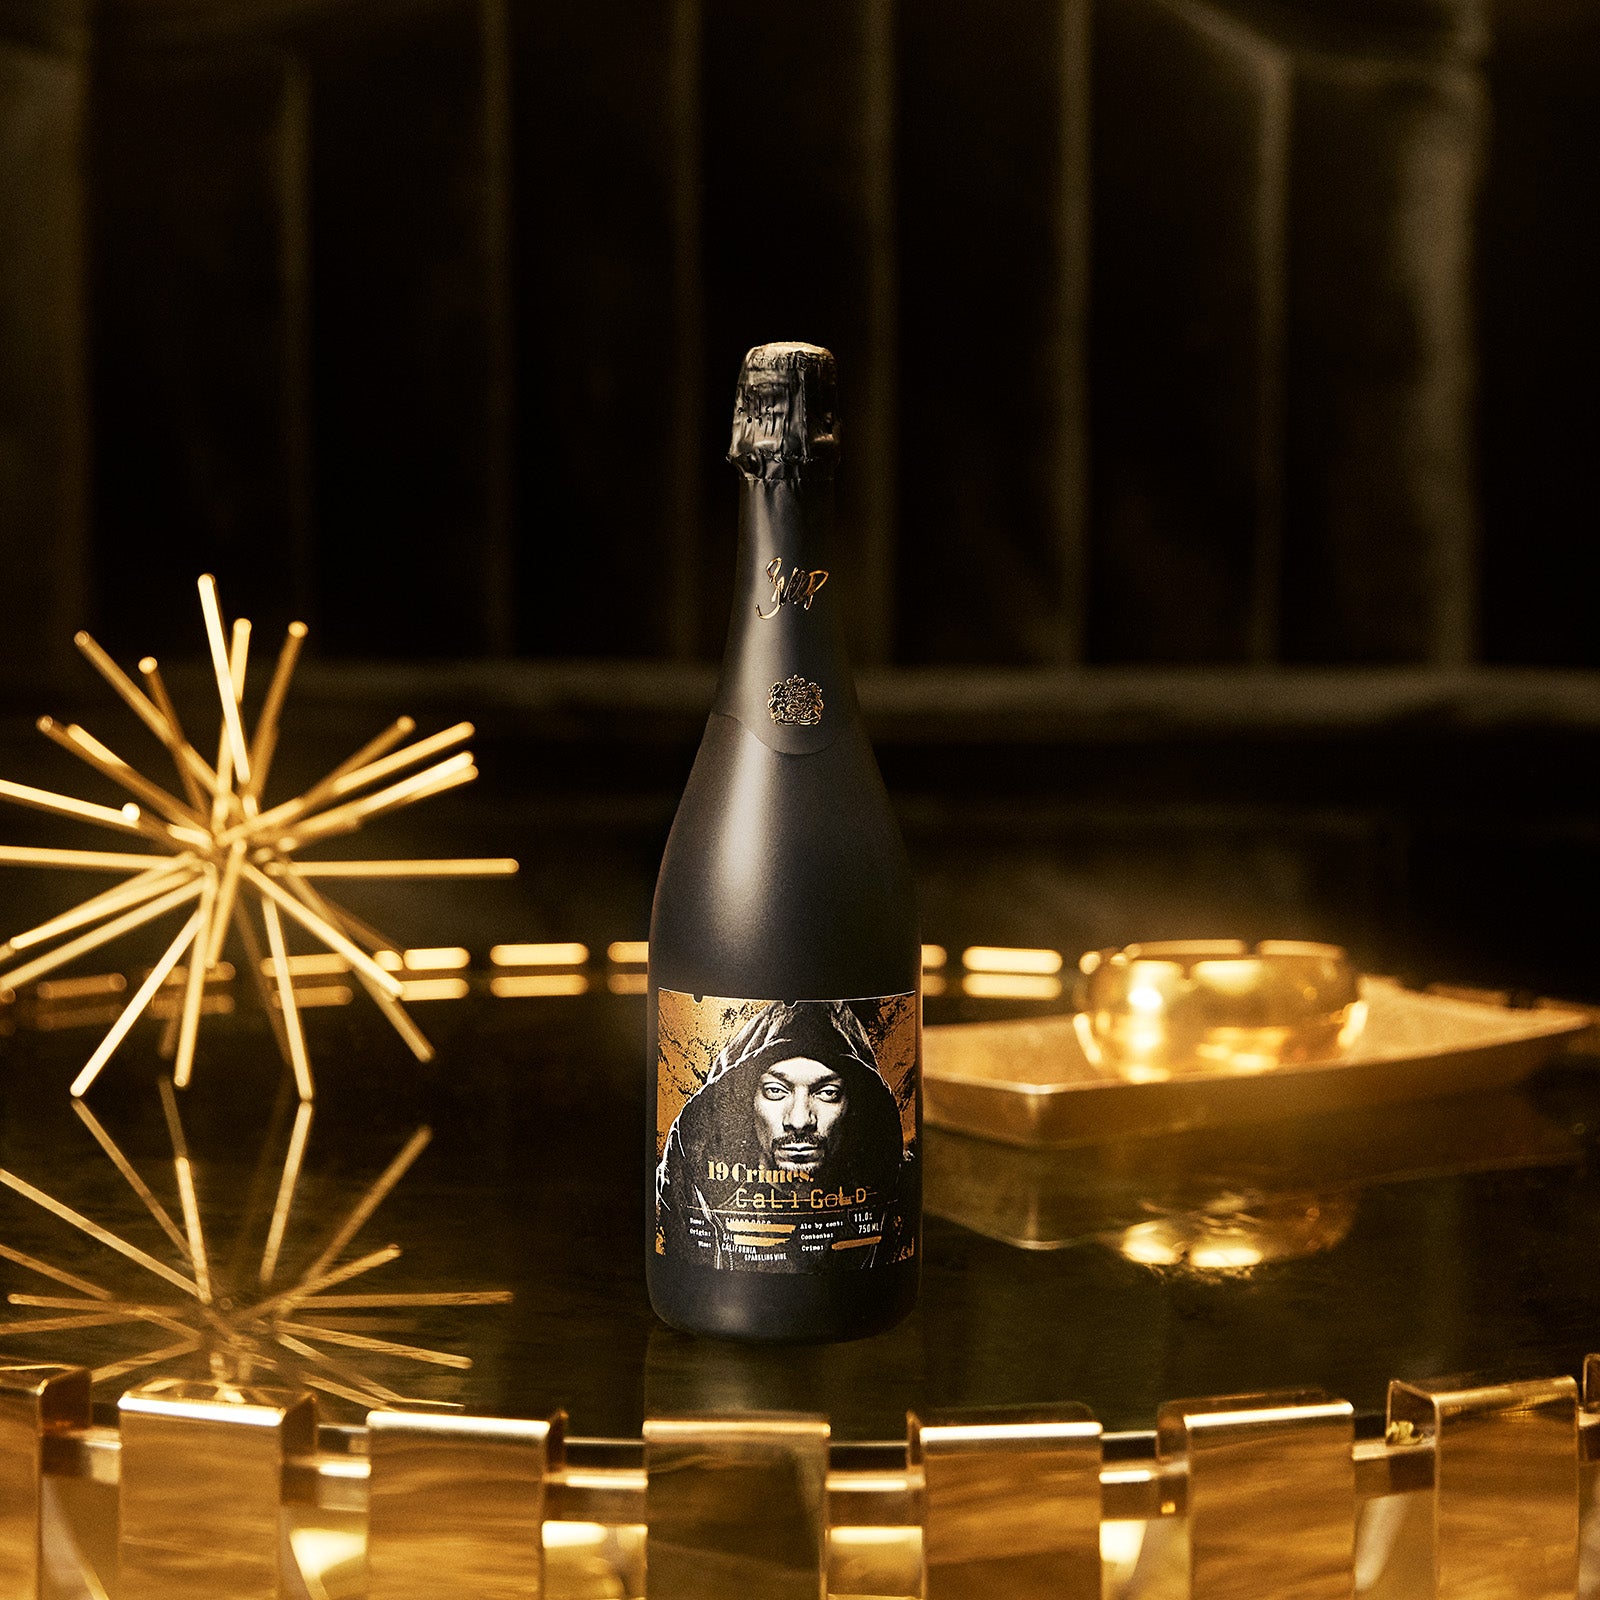 19 Crimes Snoop Dogg's Cali Gold - A sparkling wine with a G in every bottle